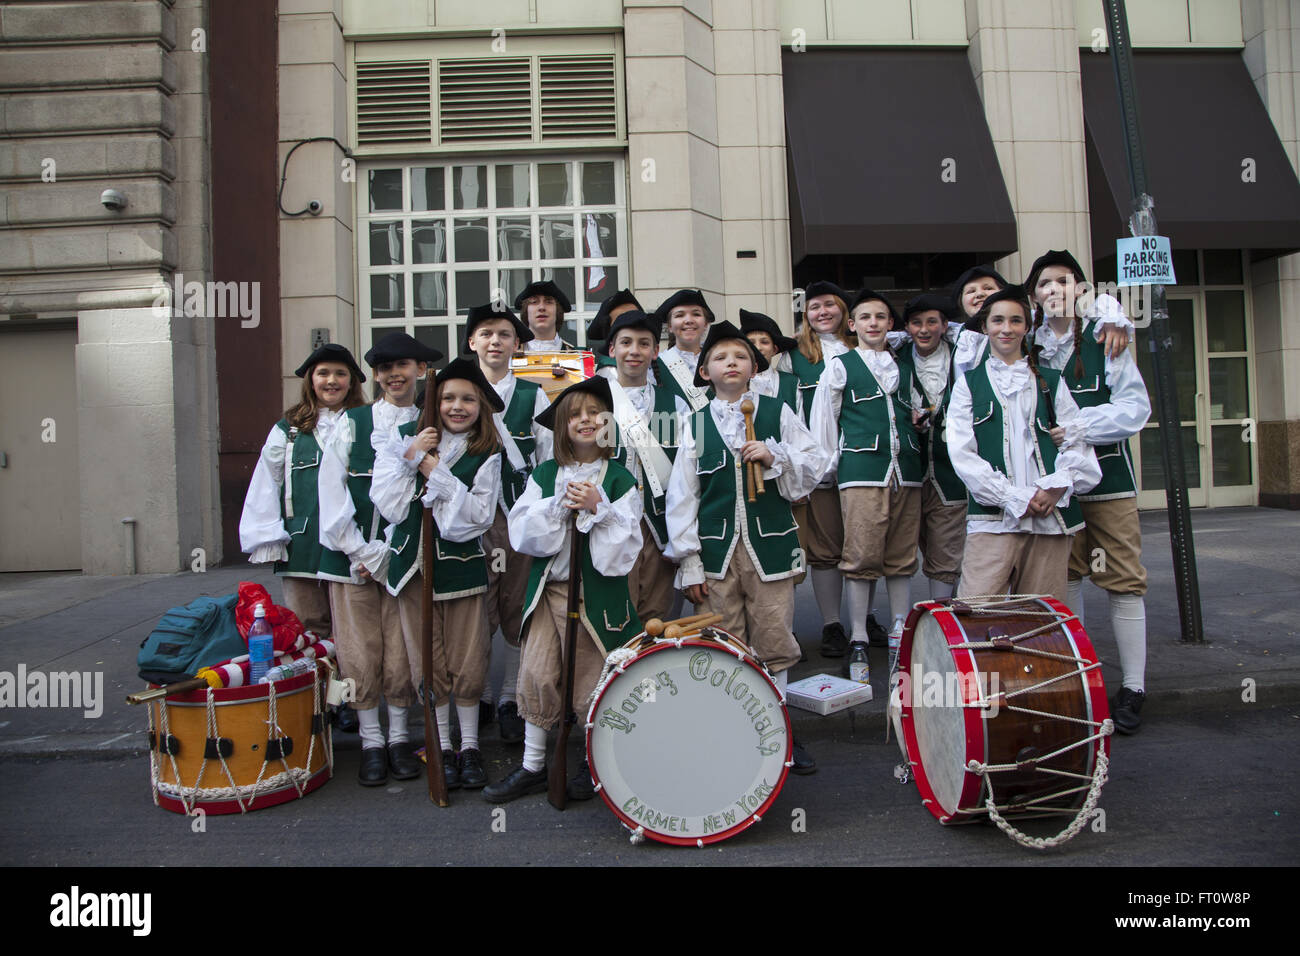 The Young Colonials from Carmel, NY ready to march in the Saint Patrick's Day Parade along 5th Ave. in New York City. Stock Photo